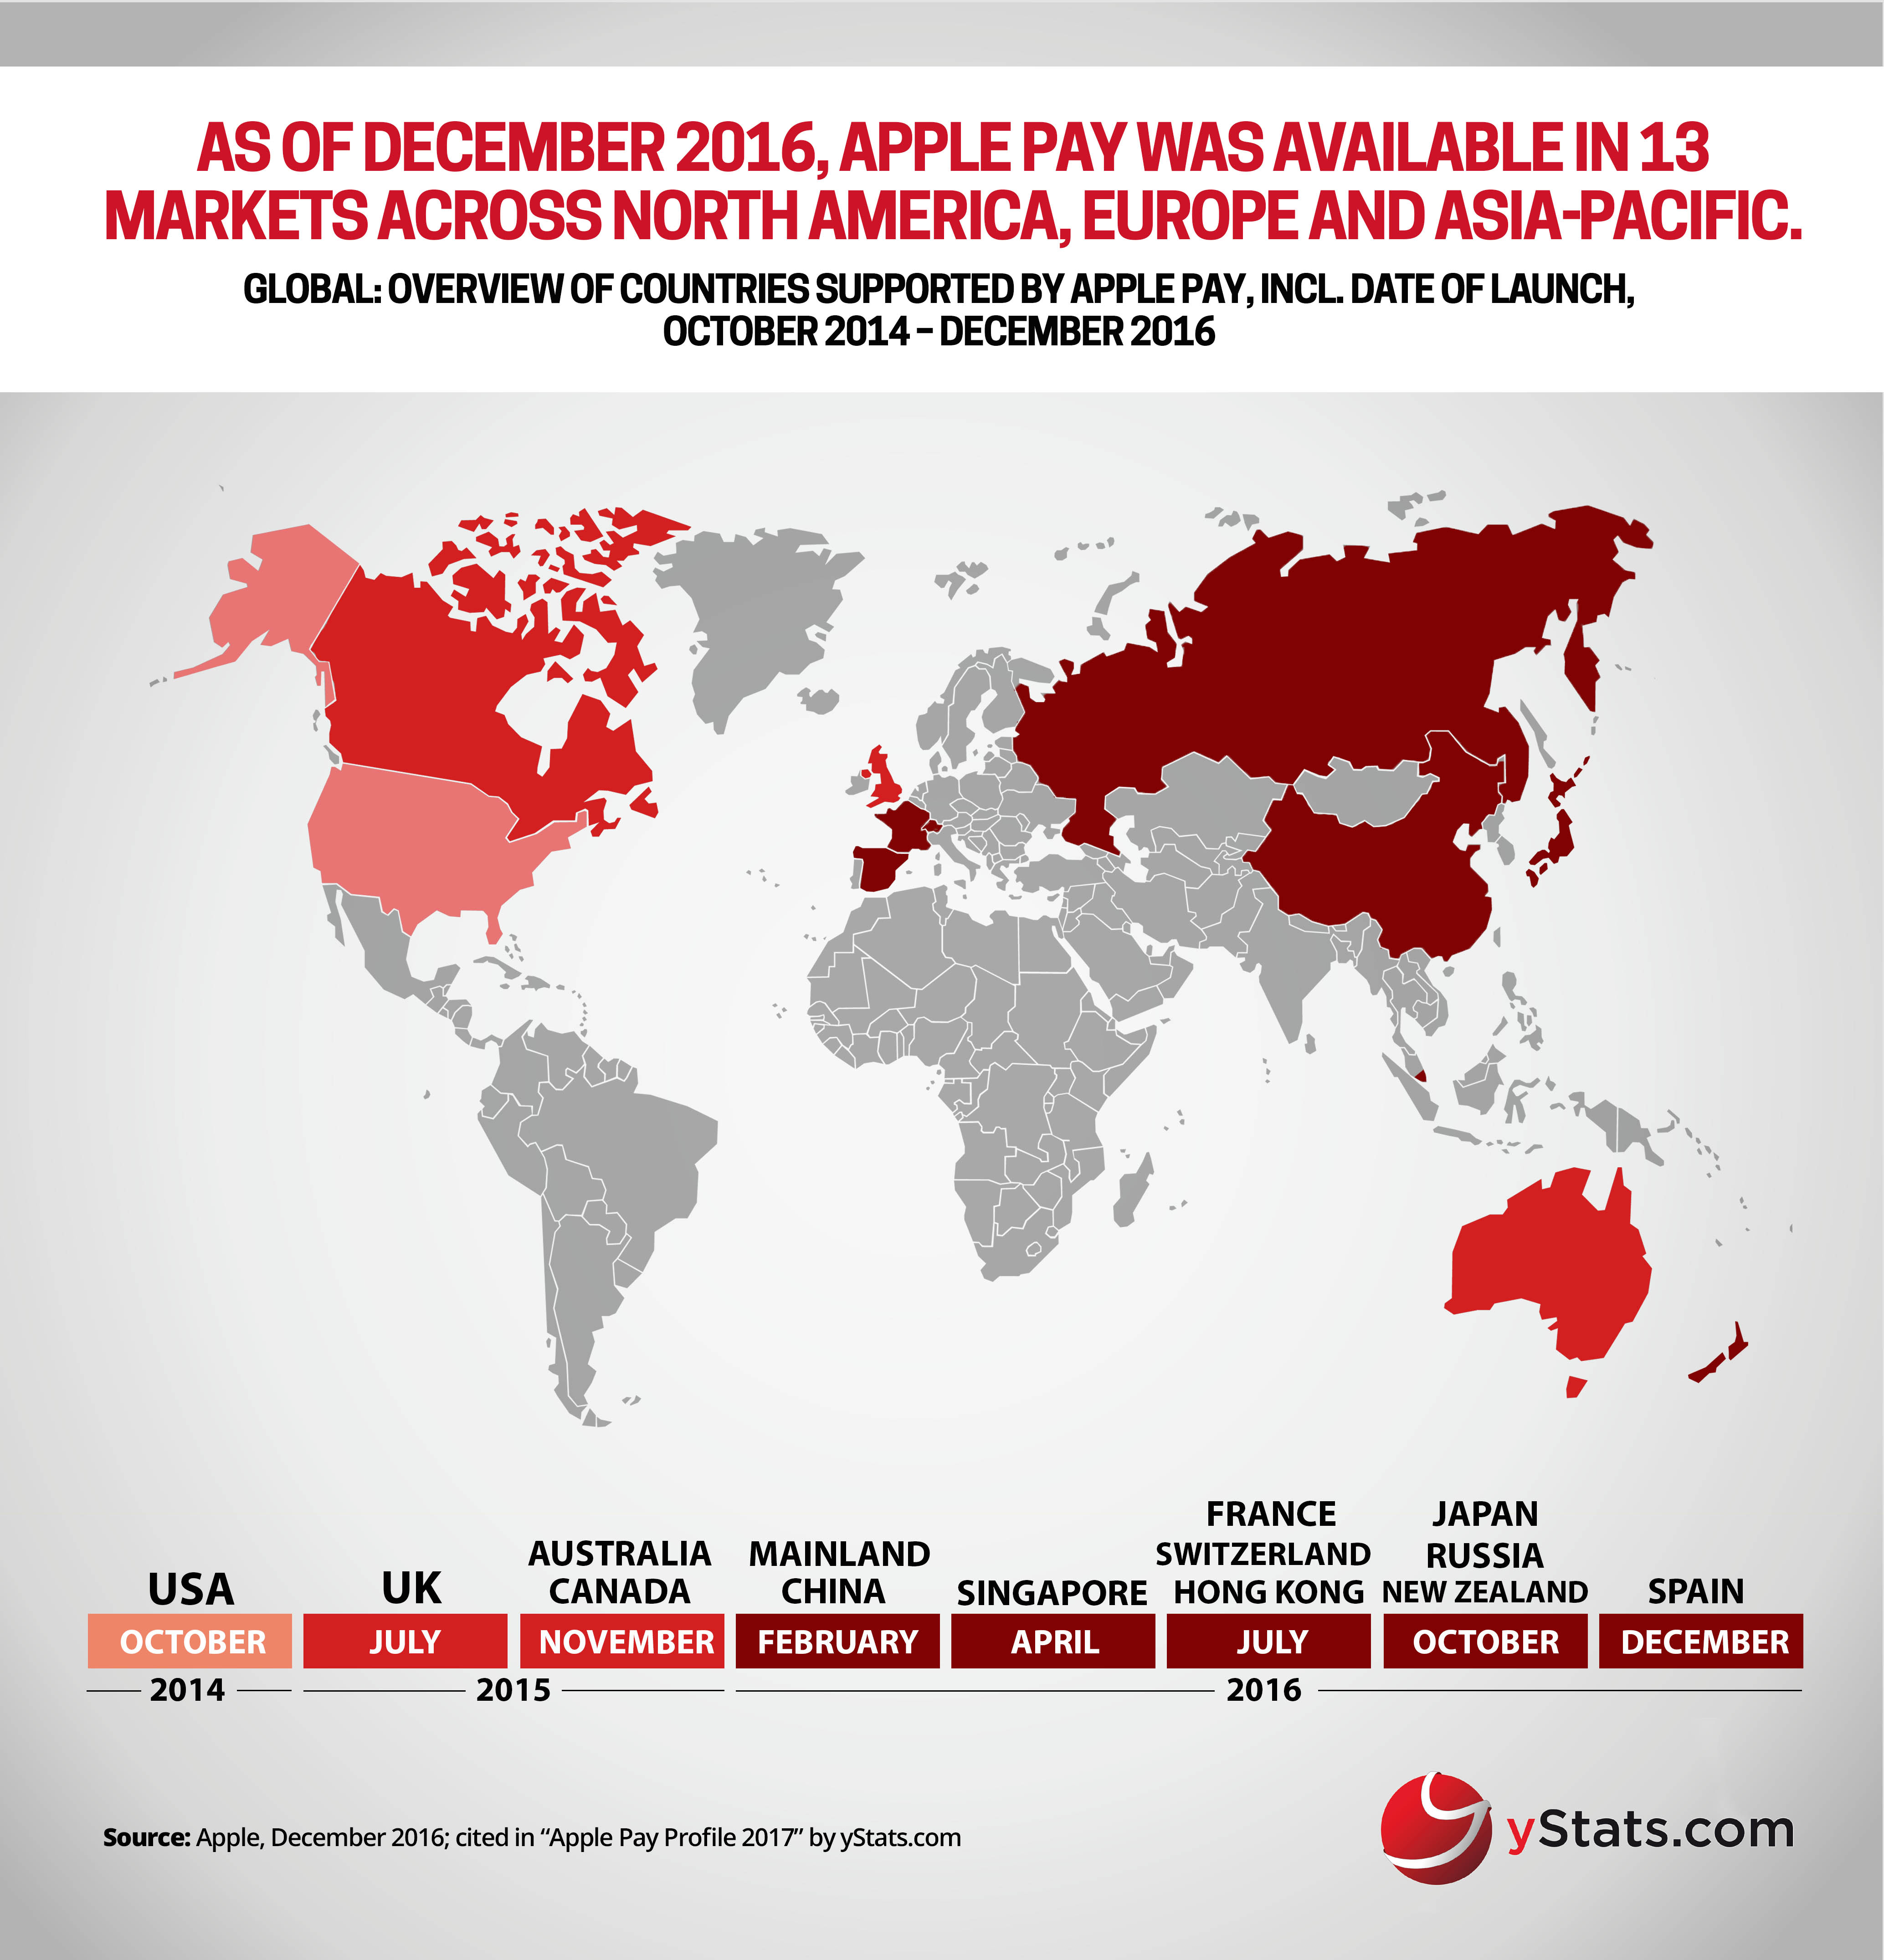 countries supported by applepay